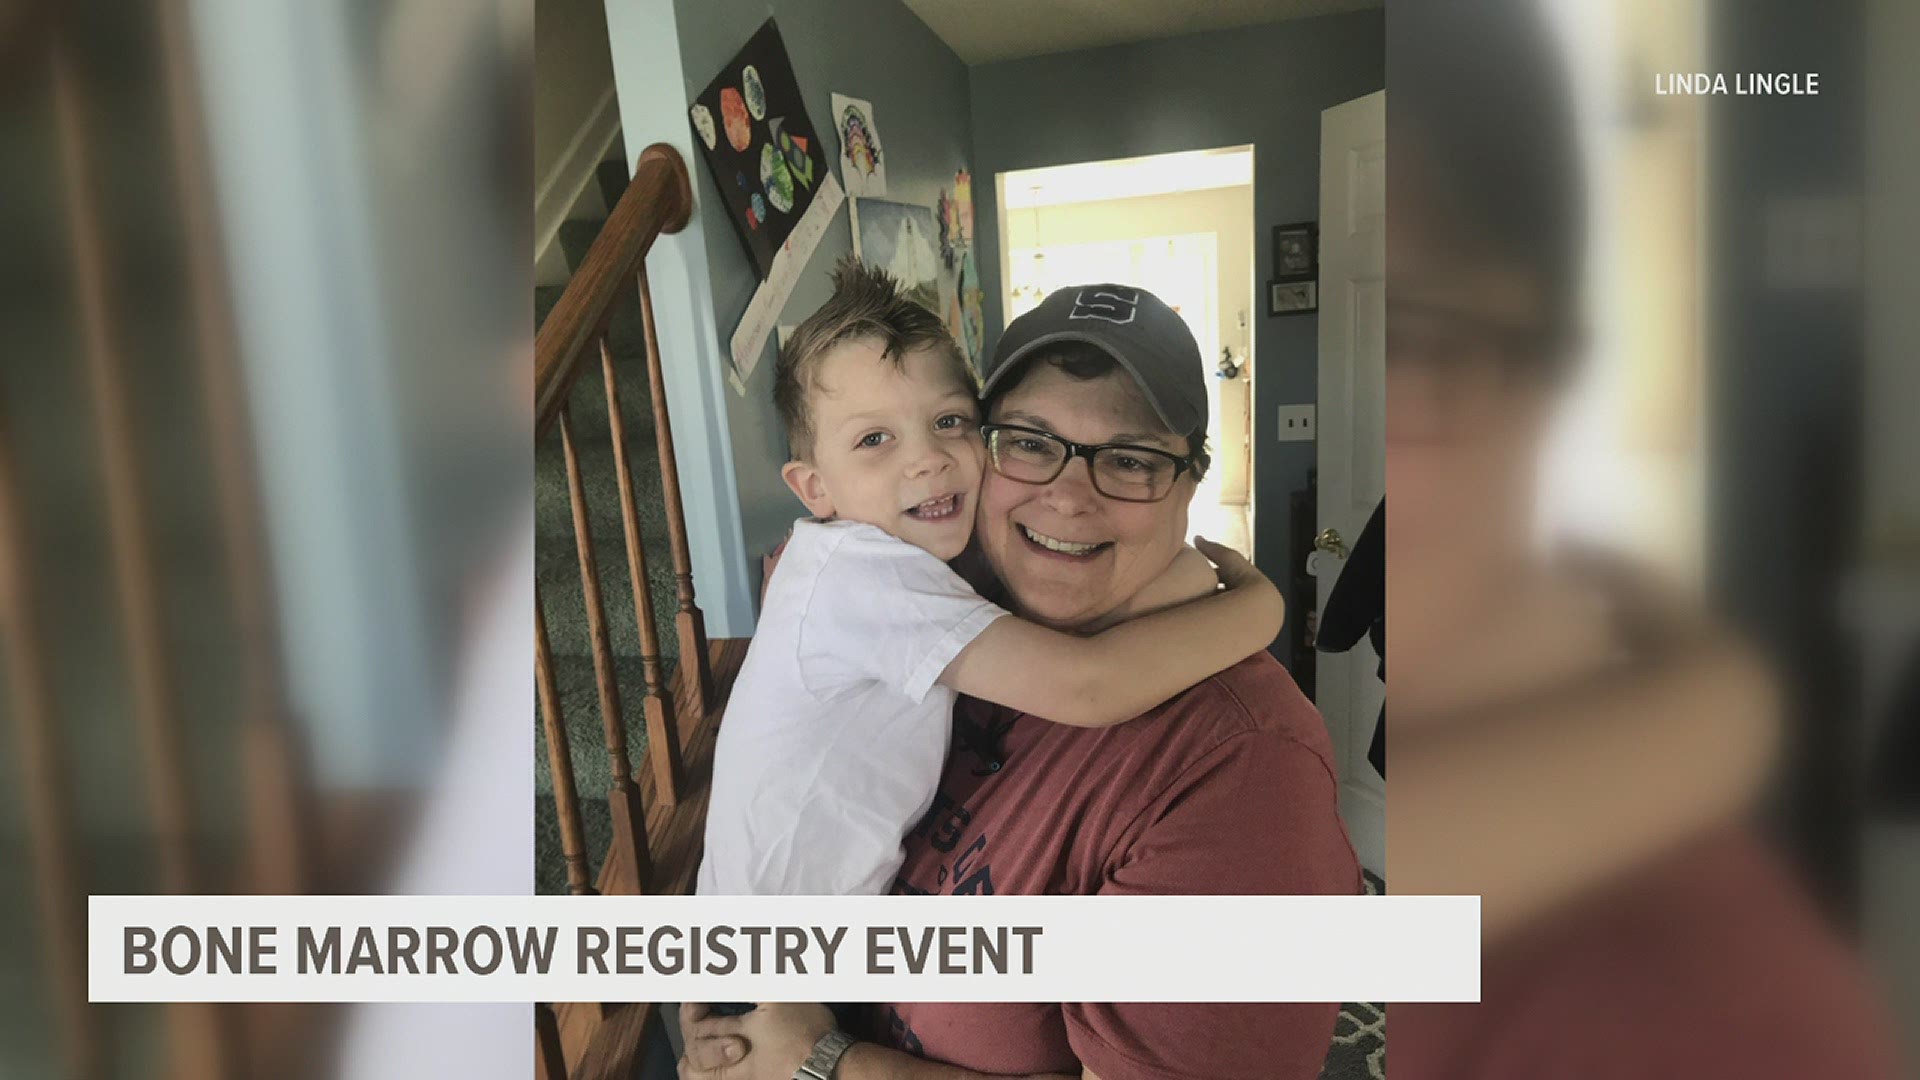 The organizations say the goal of the free event is to add more people to the registry in hopes of finding a potential donor for Linda Lingle.